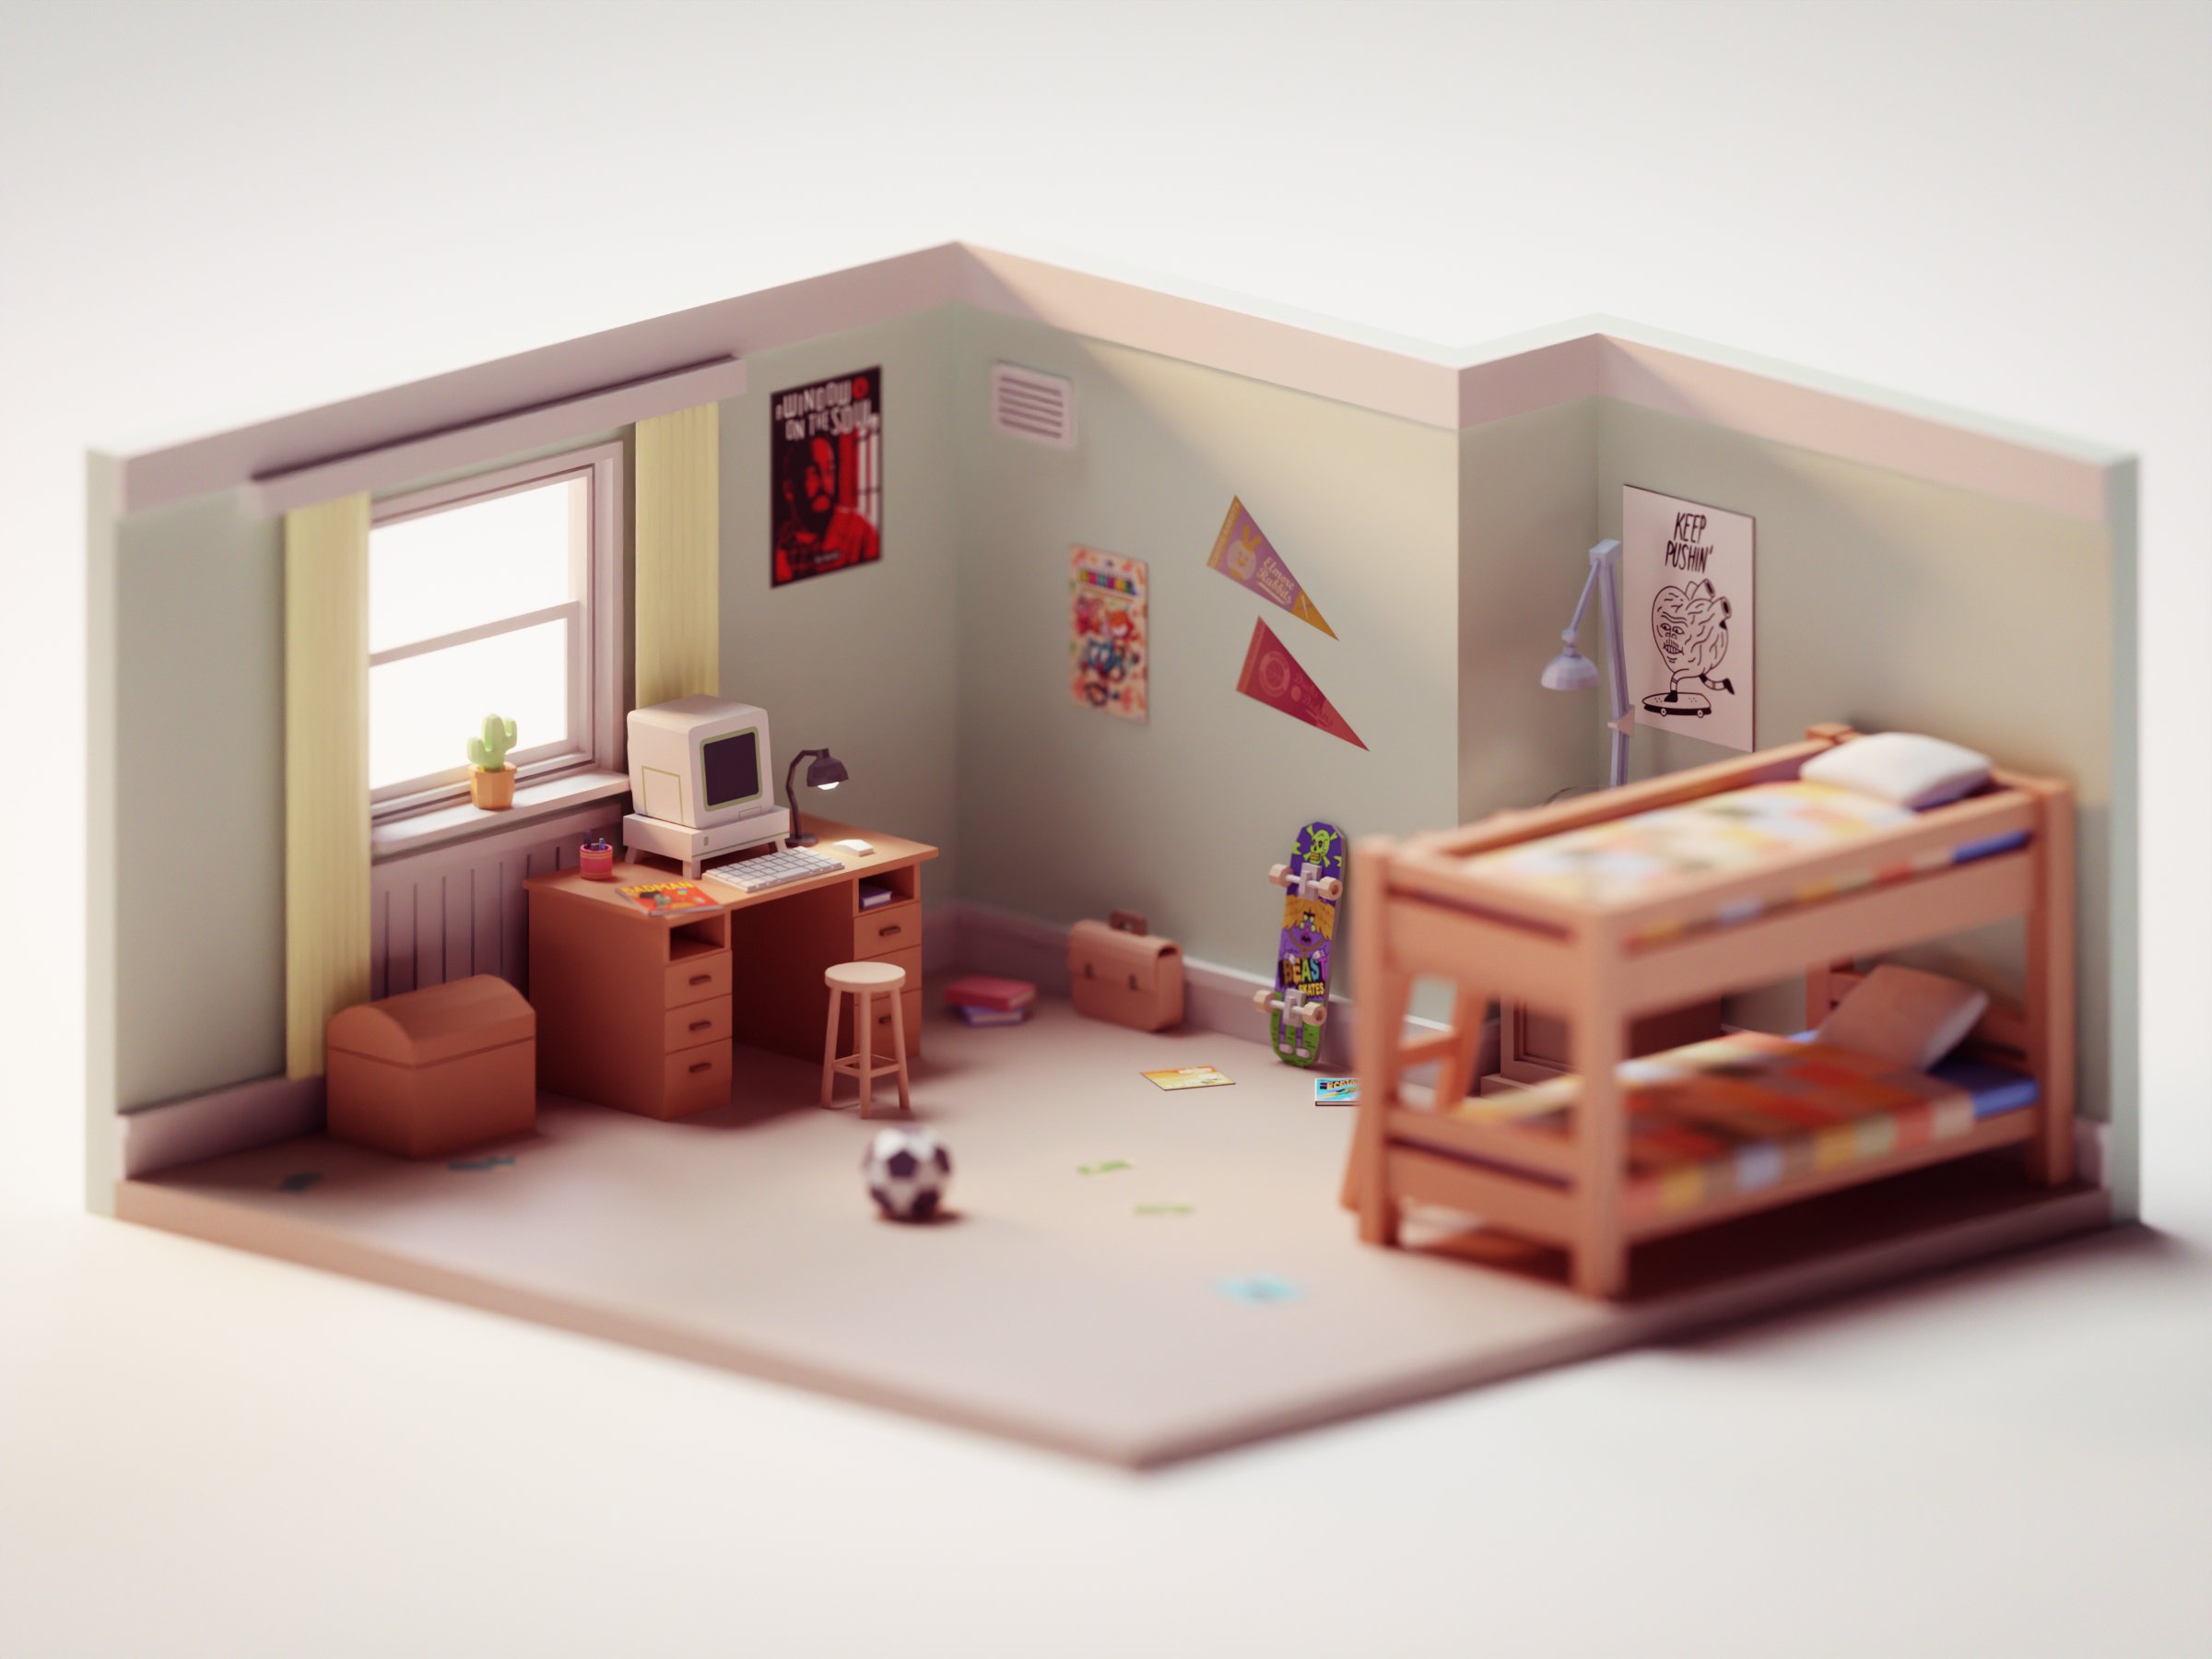 Watterson's House Recreated in 3D using Blender : r/gumball